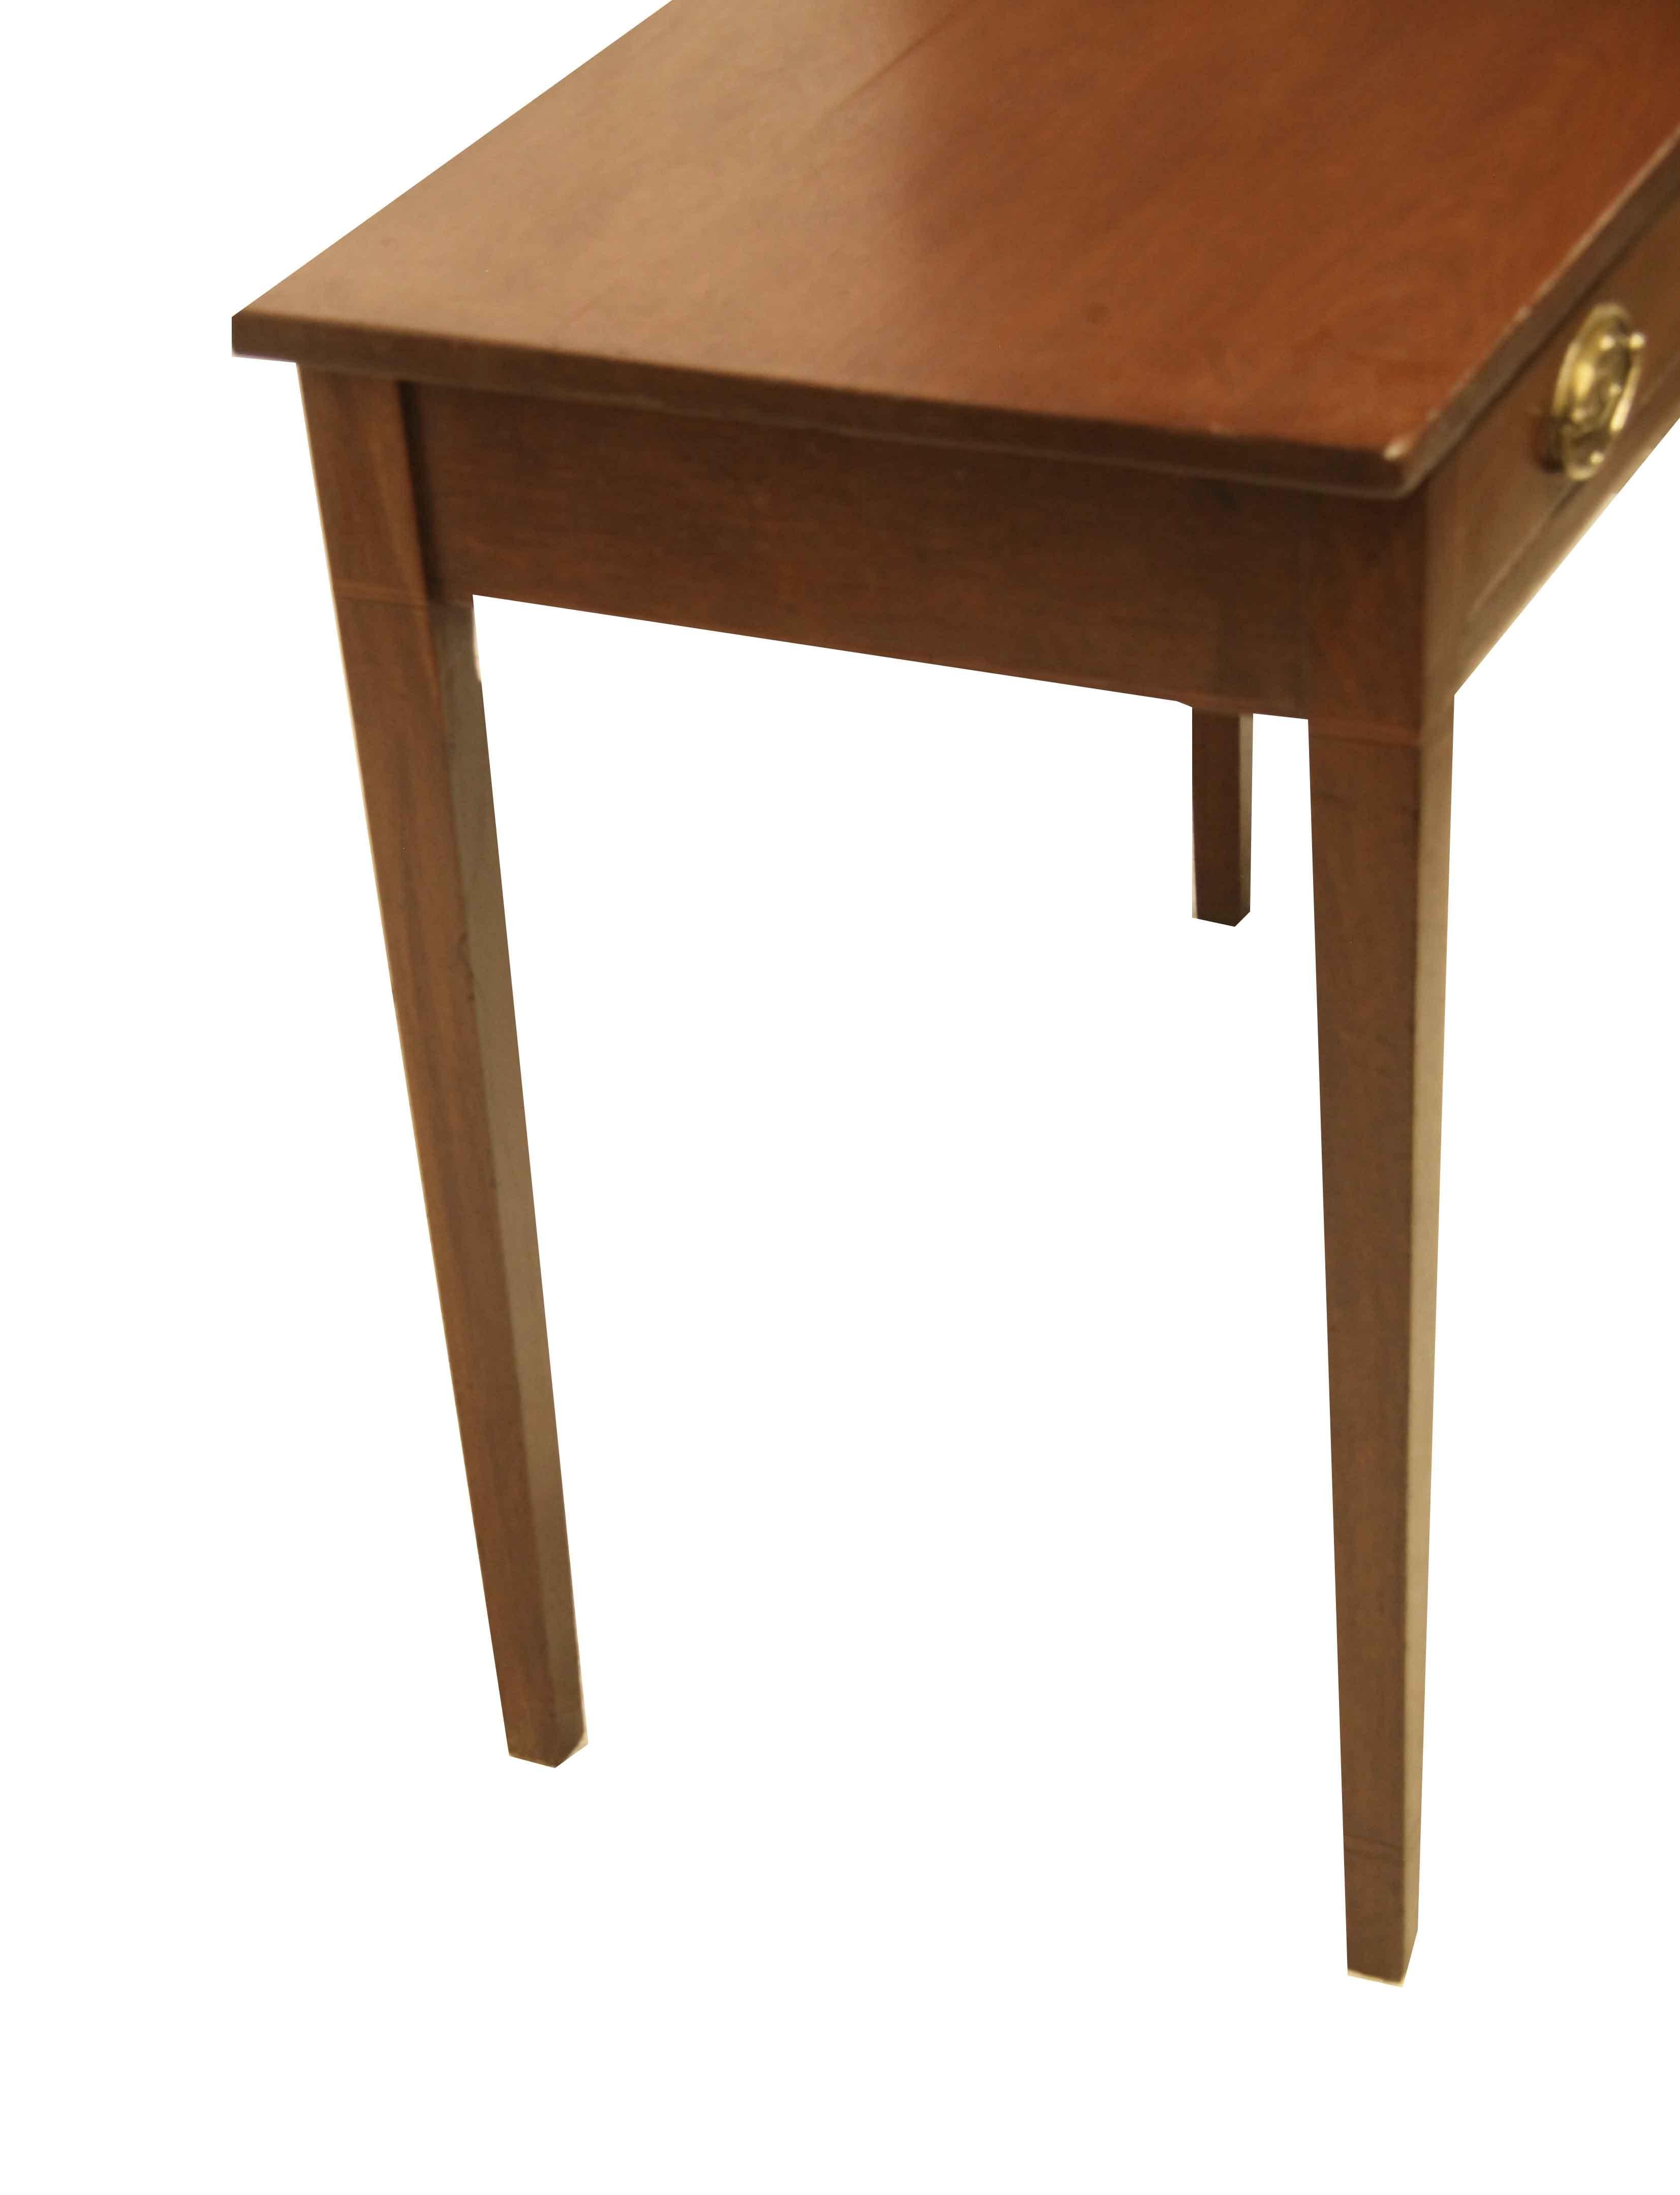 Hepplewhite inlaid side table, with beautiful color and patina, the nautical theme oval brass pulls are hand made (not original). The drawer is inlaid with boxwood around the edge; there is a band of inlay below the drawer continuing around the